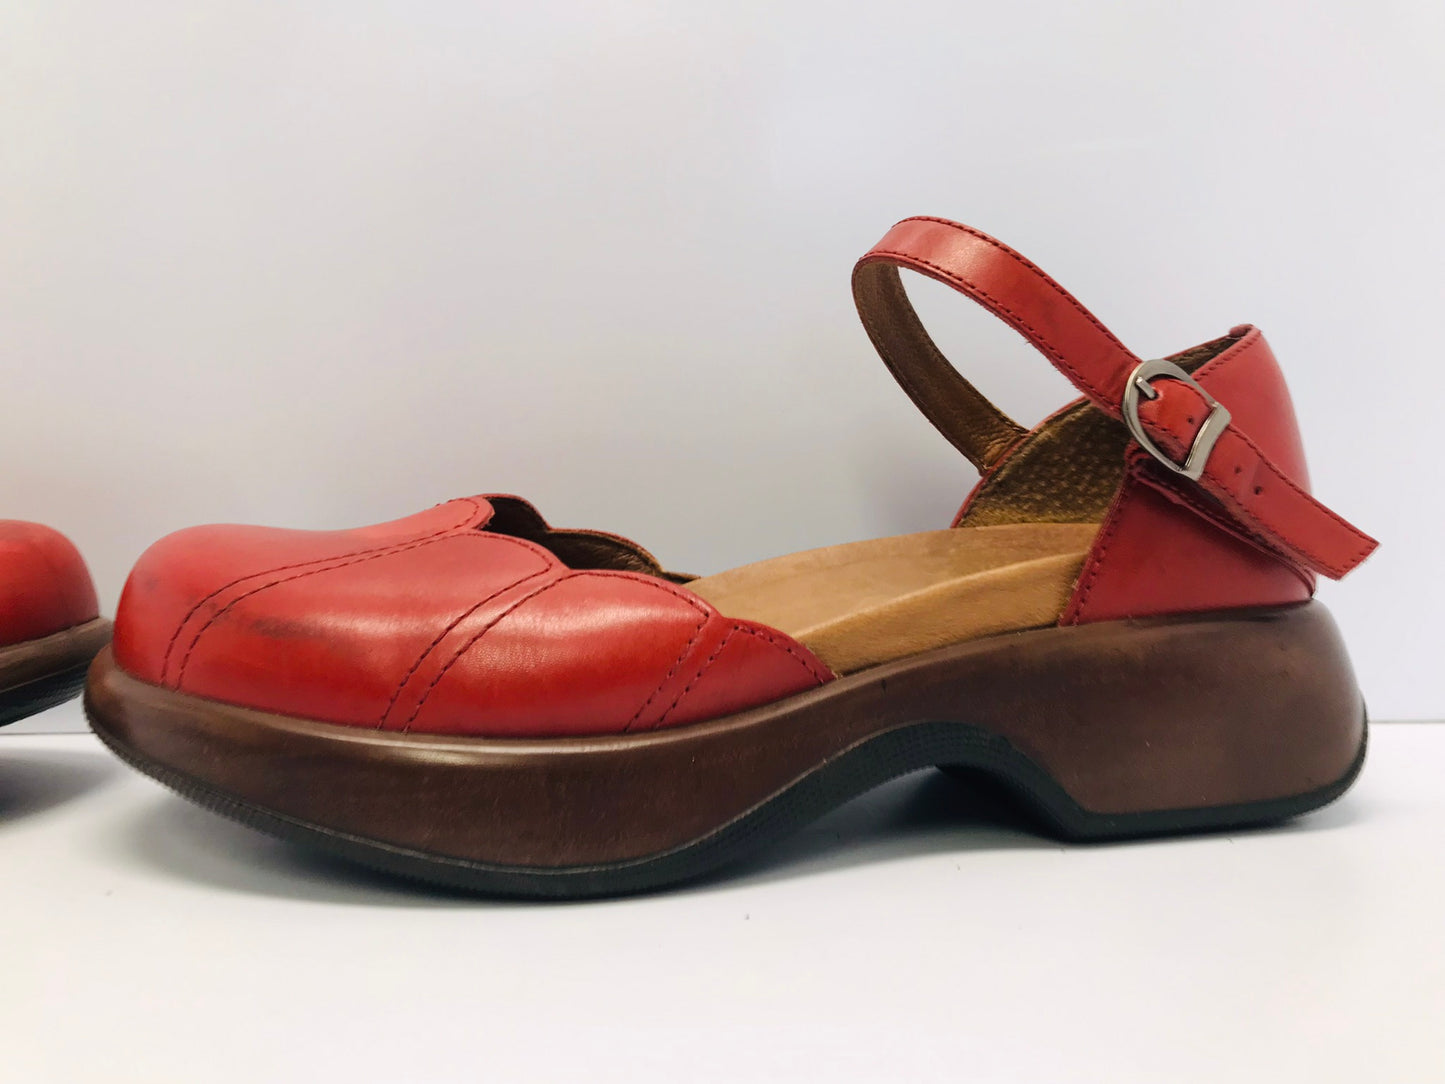 Ladies Dress Shoes Size 8.5 Euro 39 Dansko With Arch Support Leather Made In Europe Red Worn Once Retail 239.99